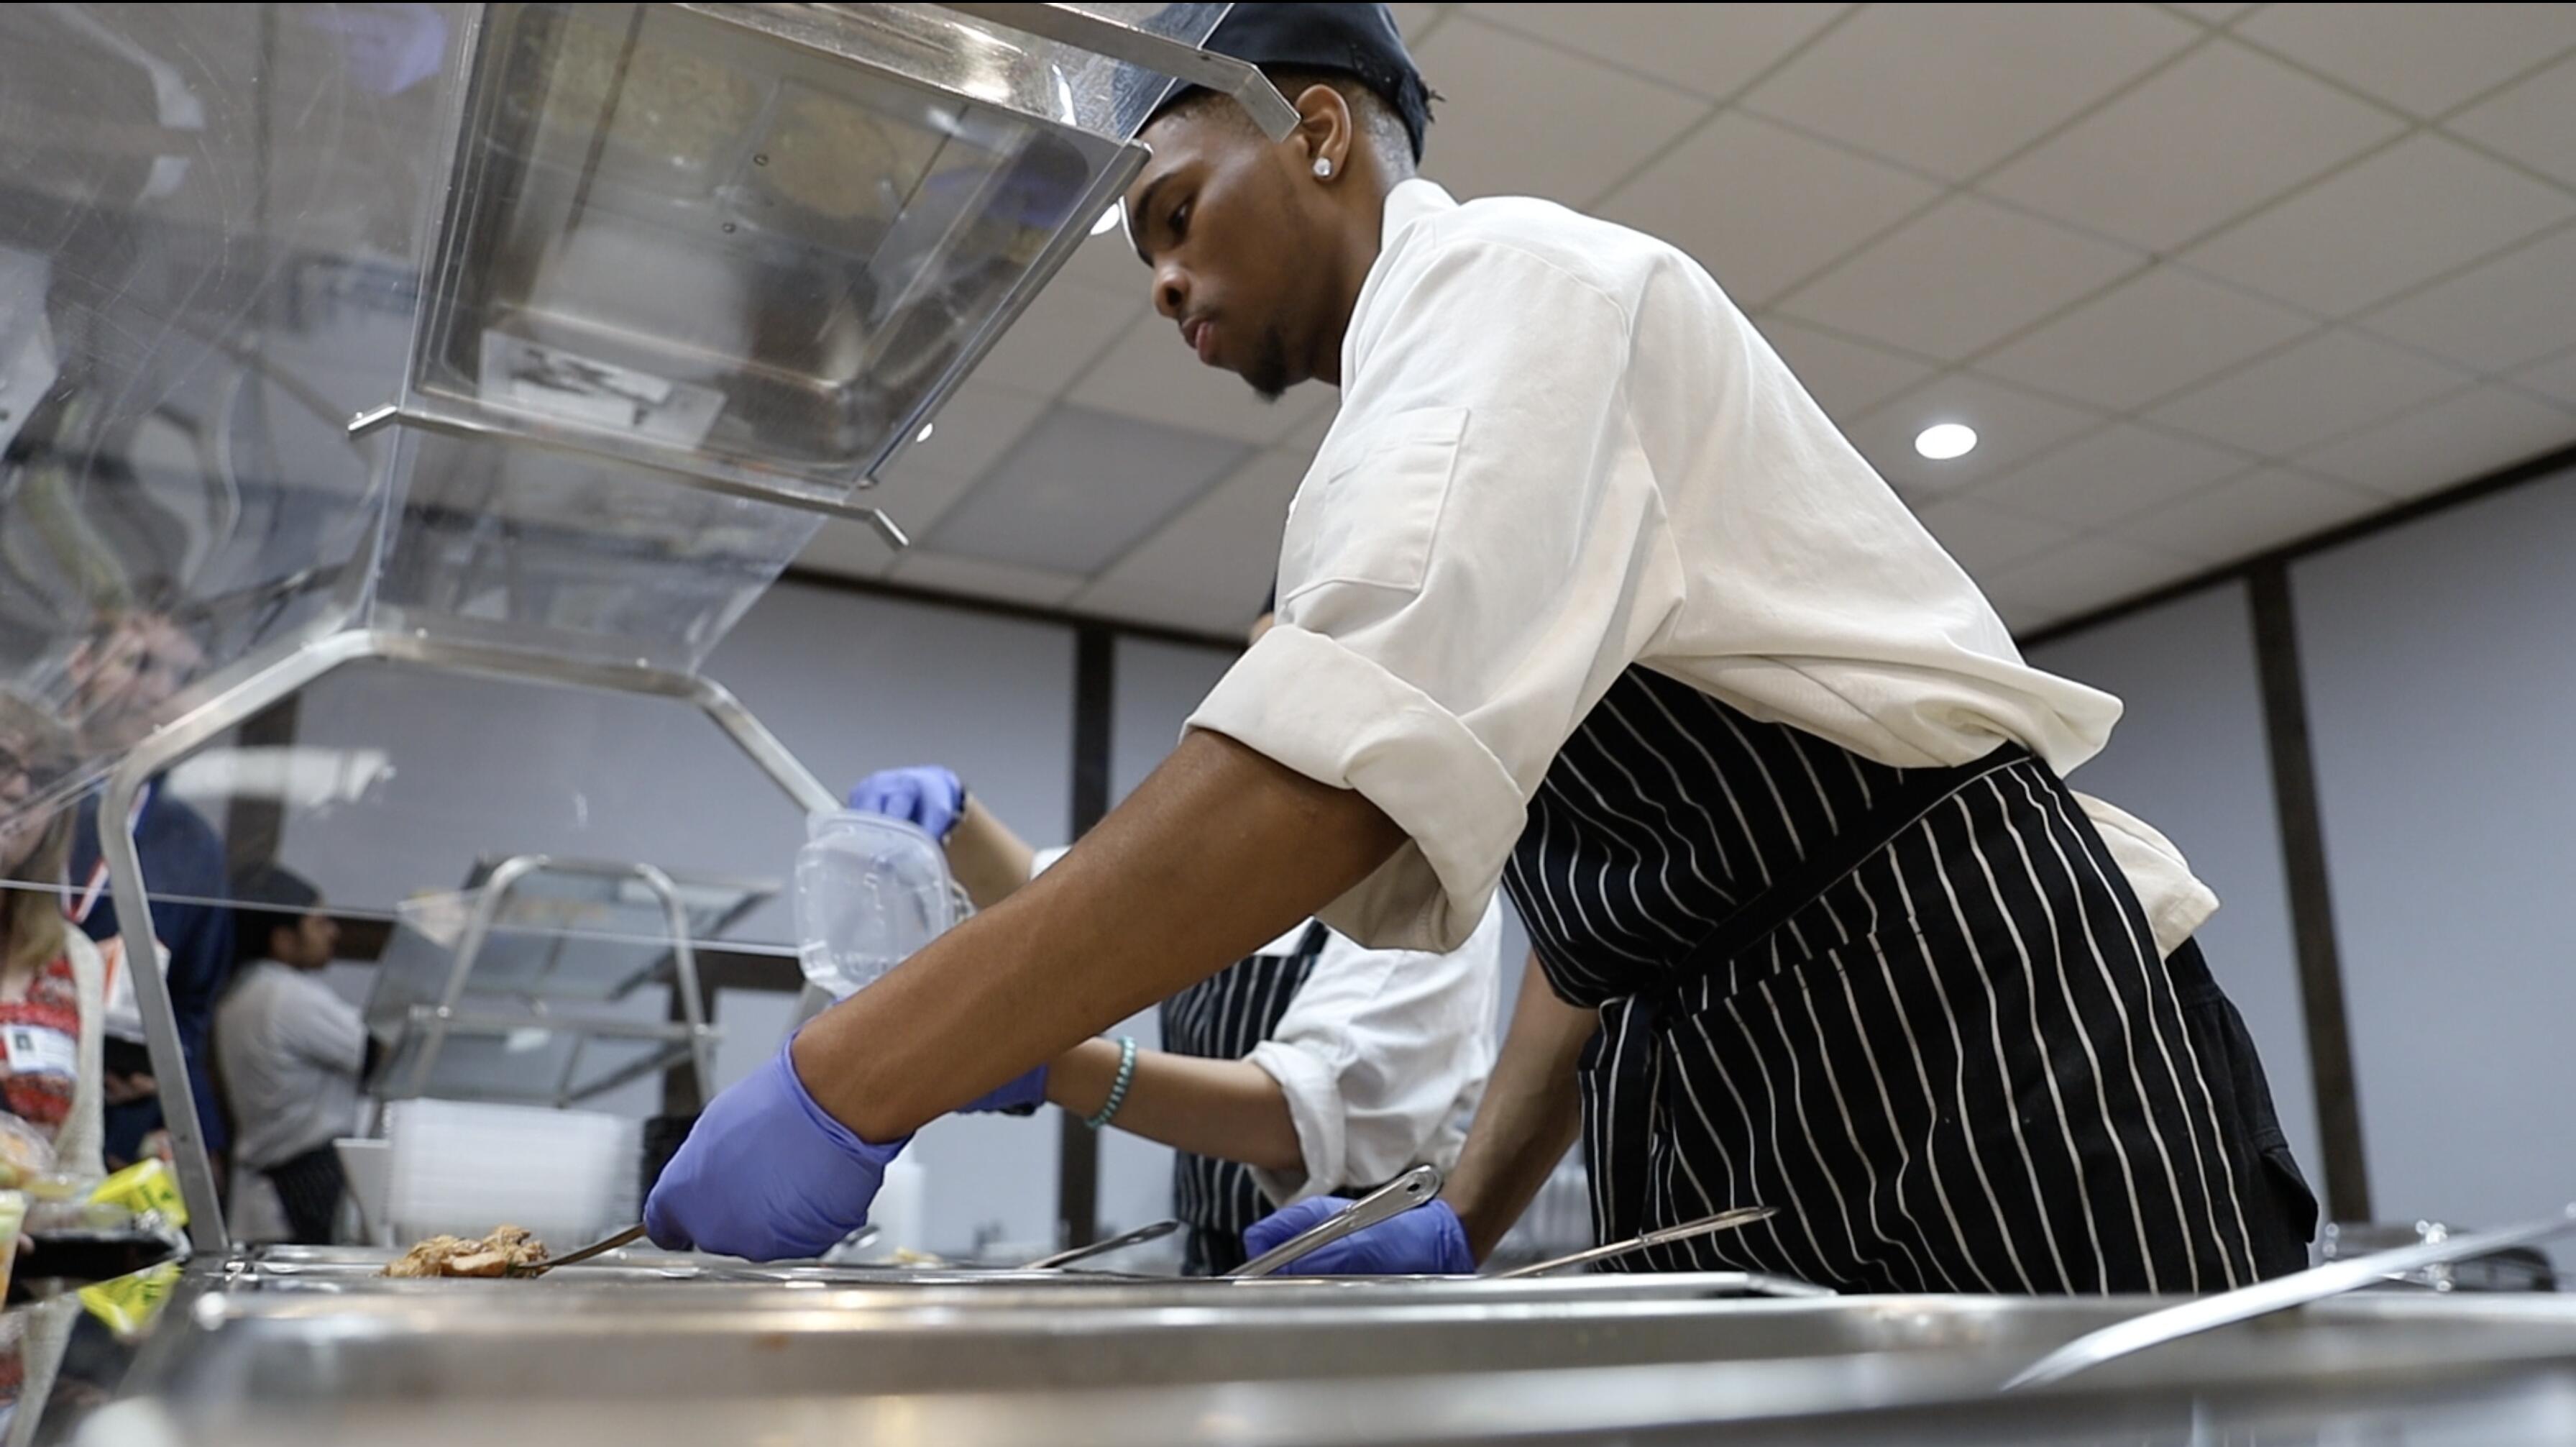 A career and technical education student serves freshly made food